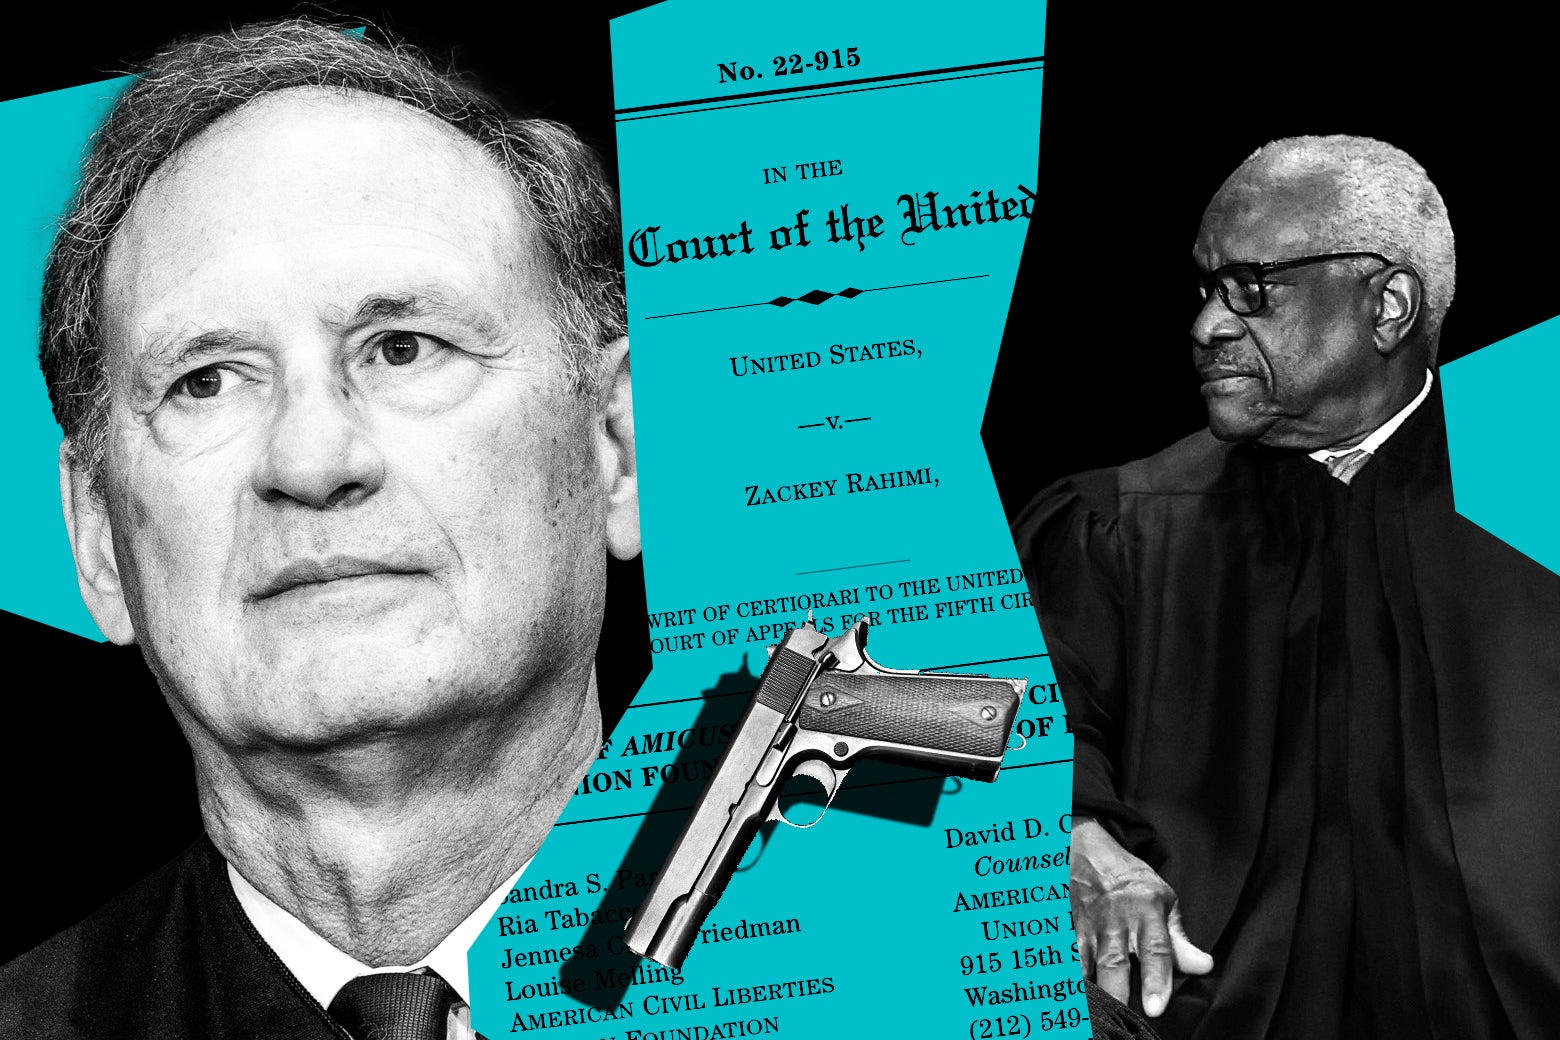 The Supreme Court's brief, revealing new decision about guns, in